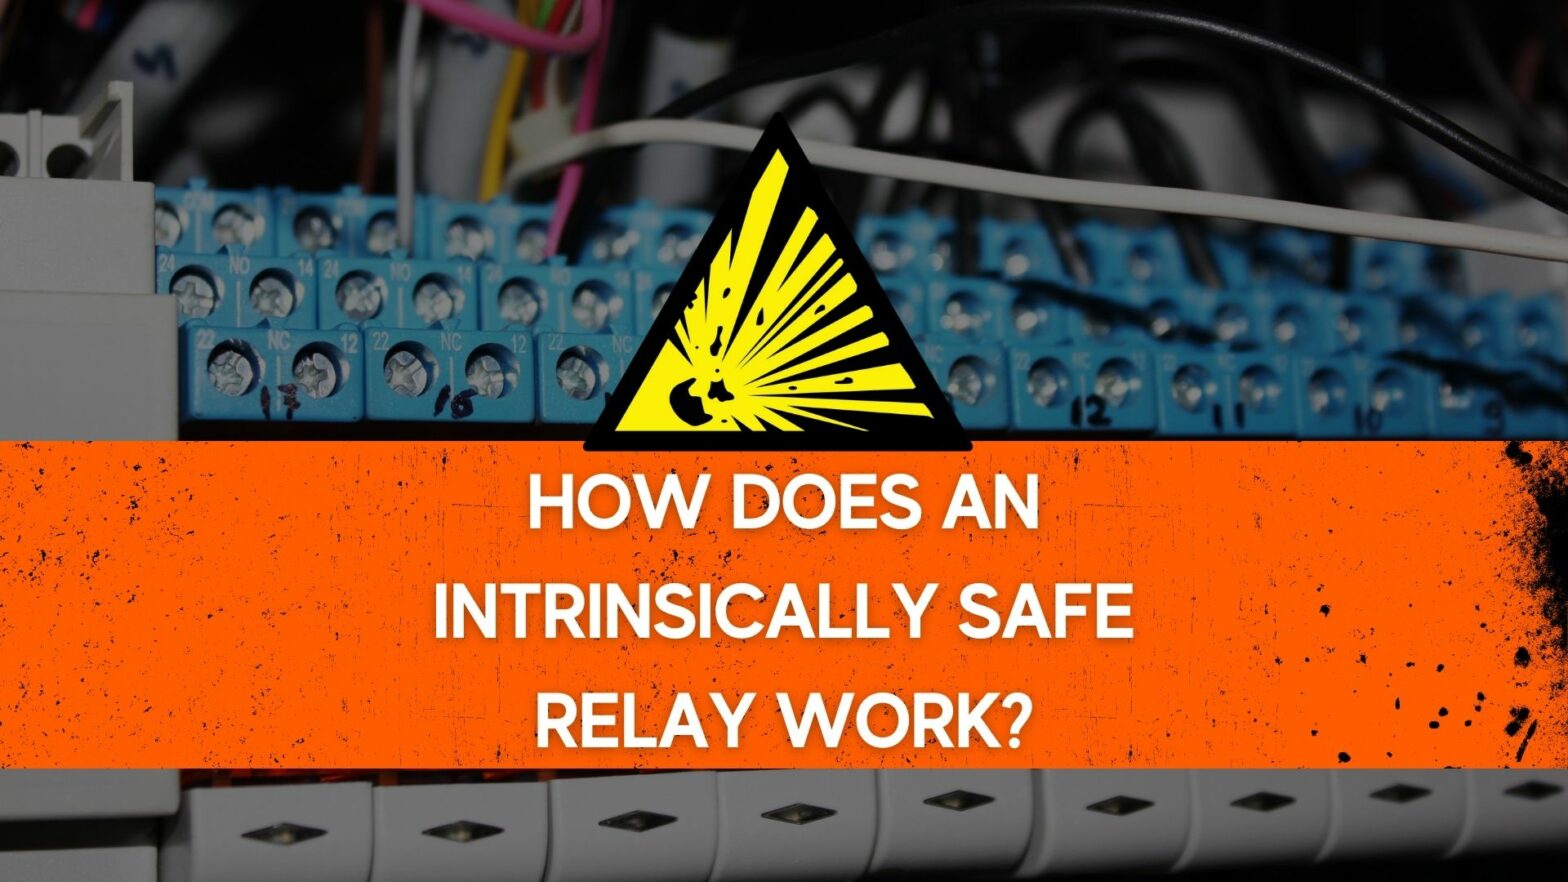 How Does an Intrinsically Safe Relay Work